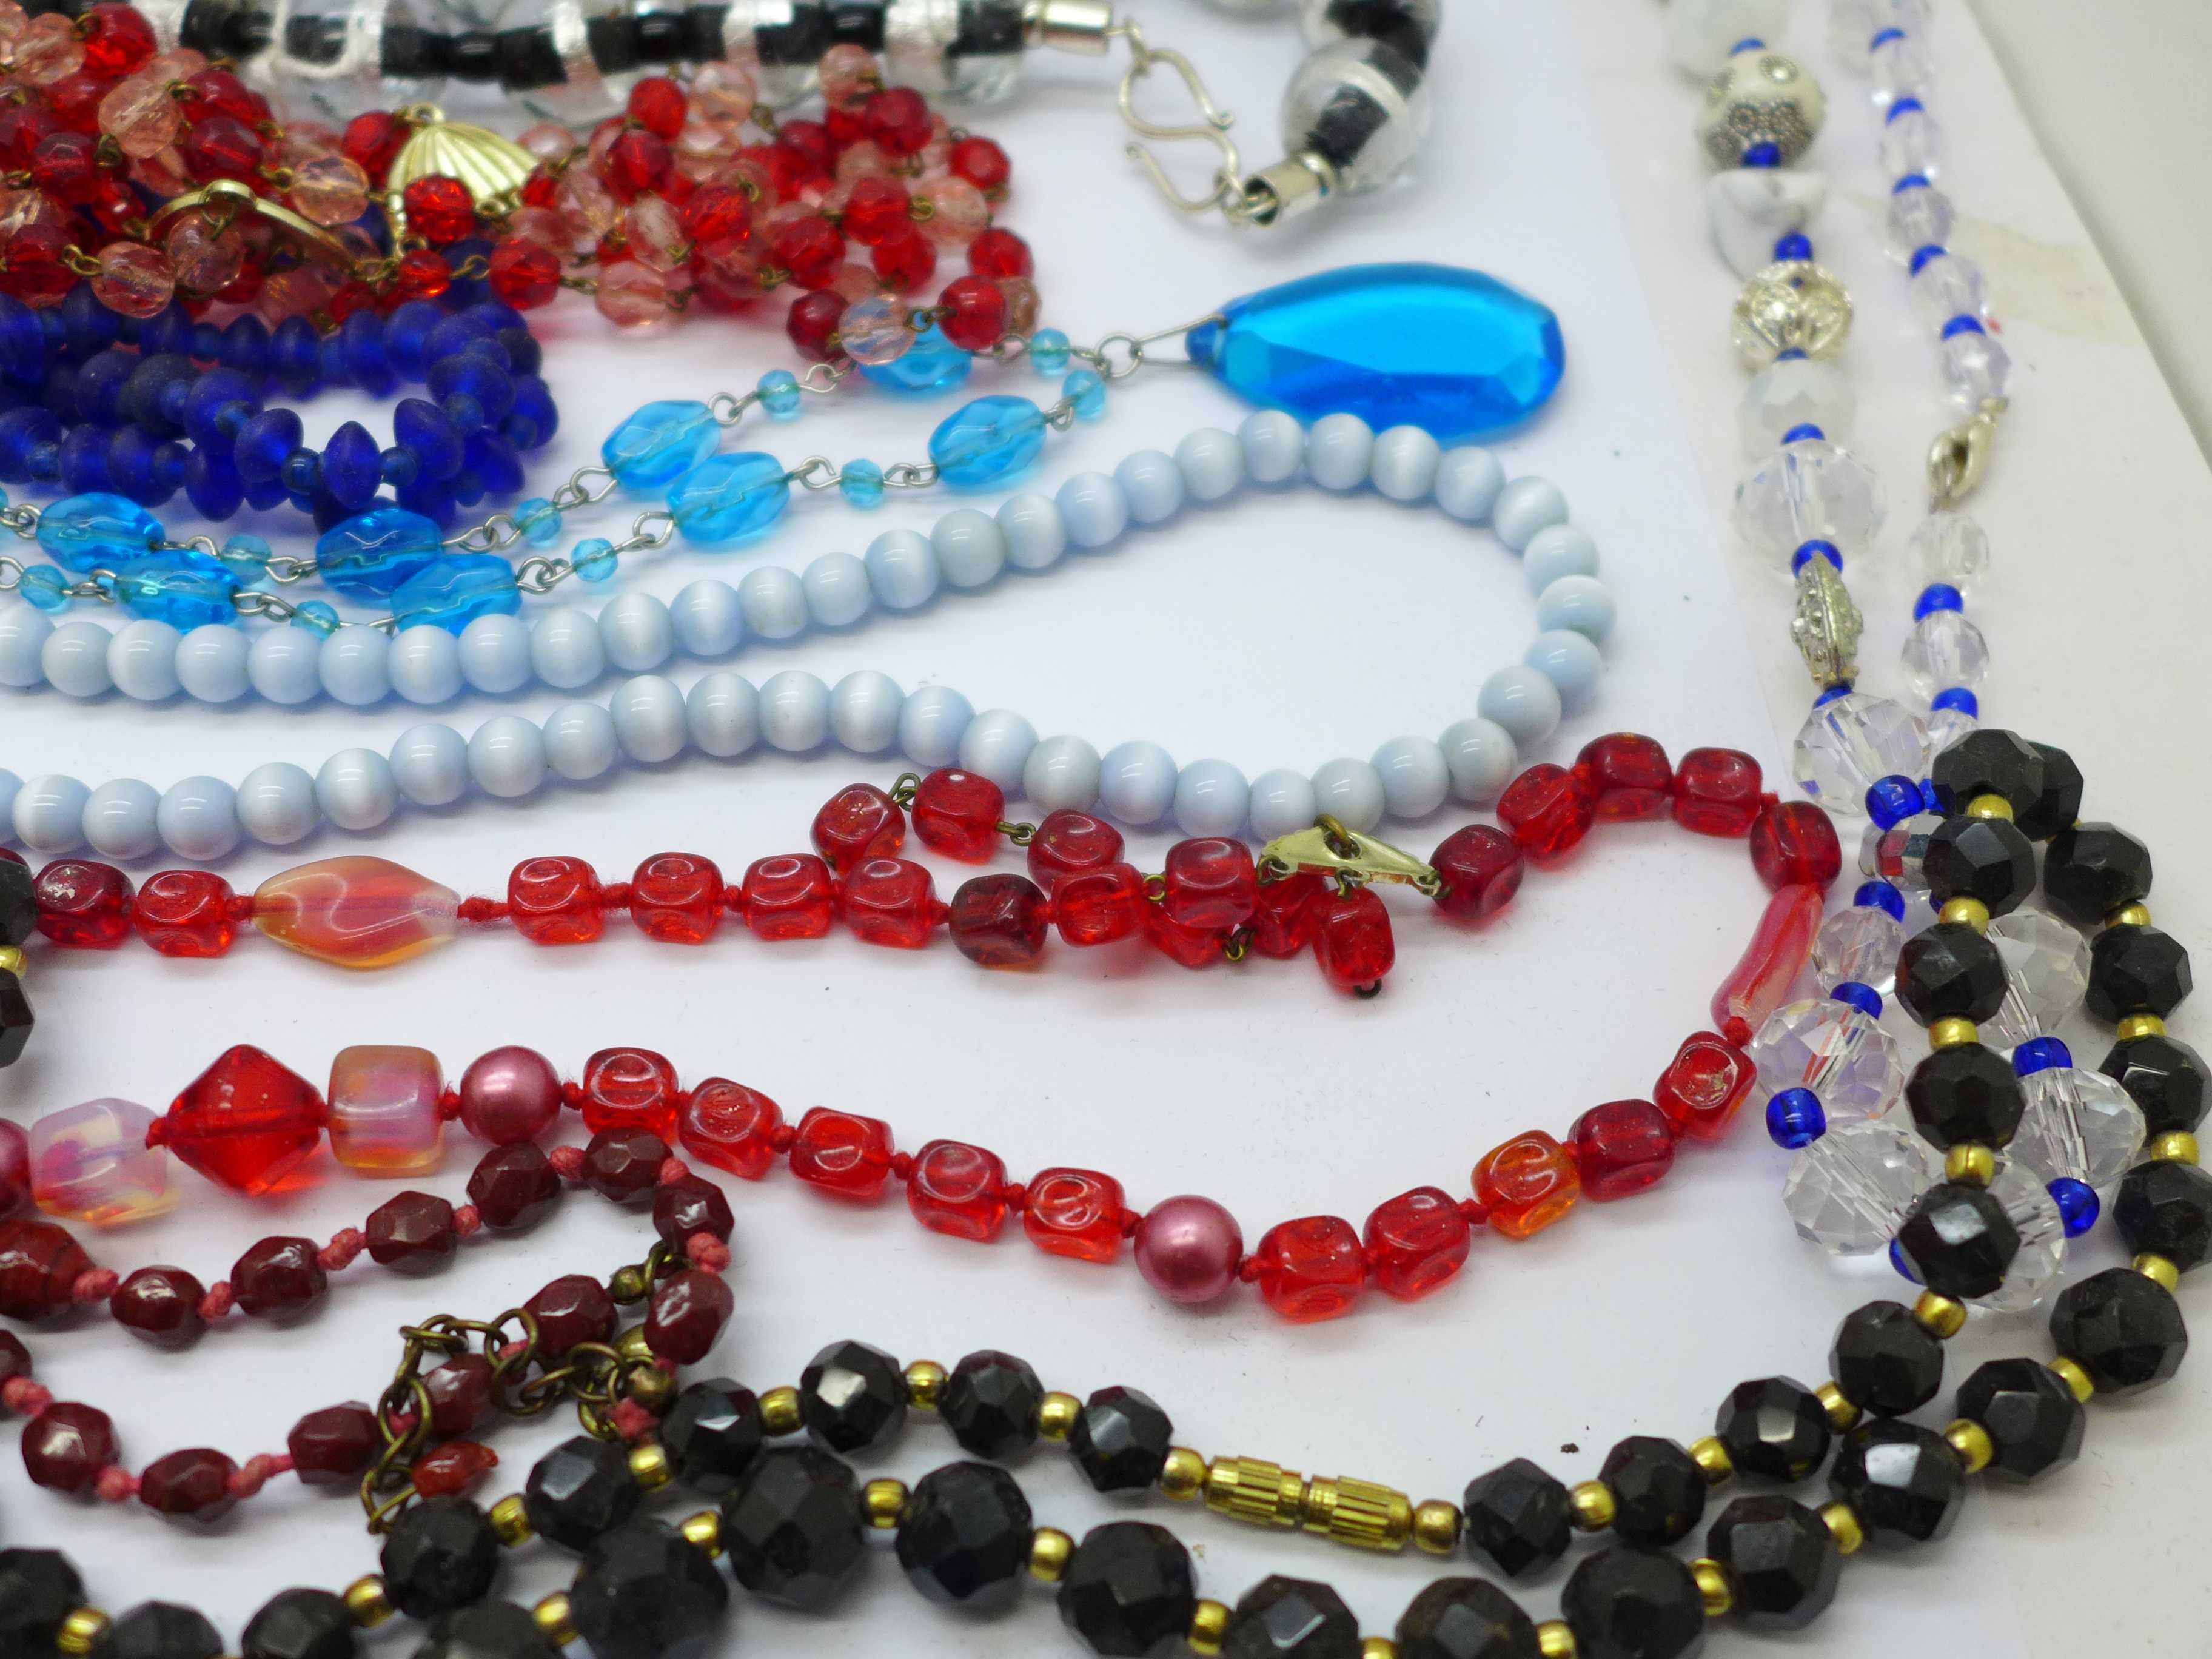 Glass bead necklaces and bracelets - Image 3 of 4